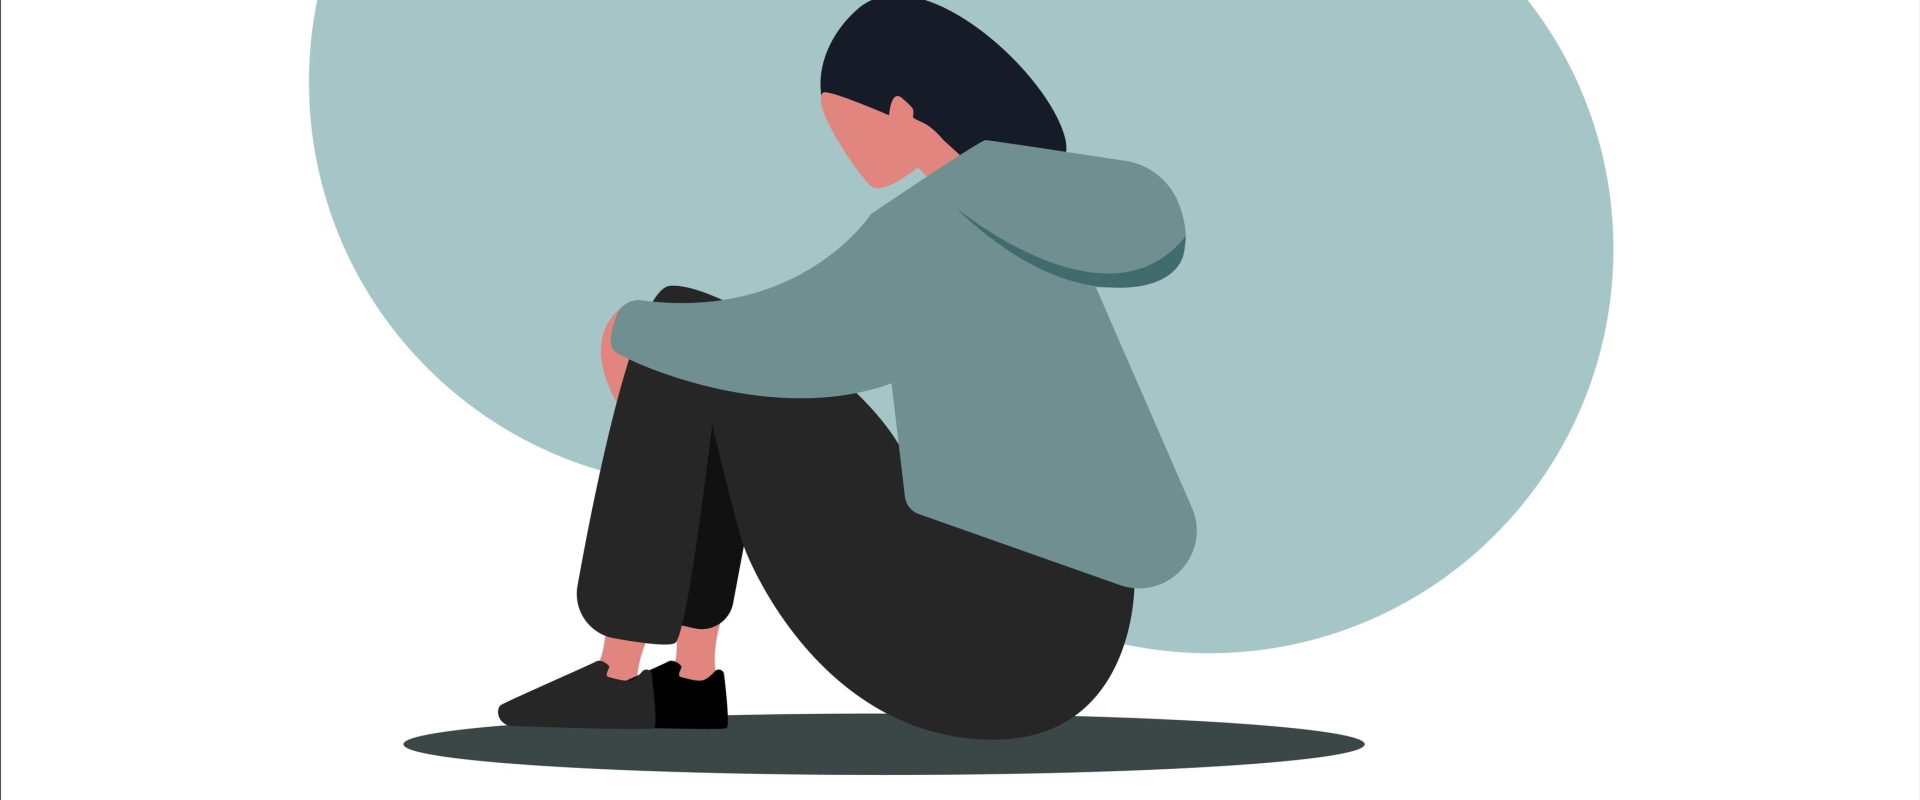 What Causes Depression and How Can We Treat It?